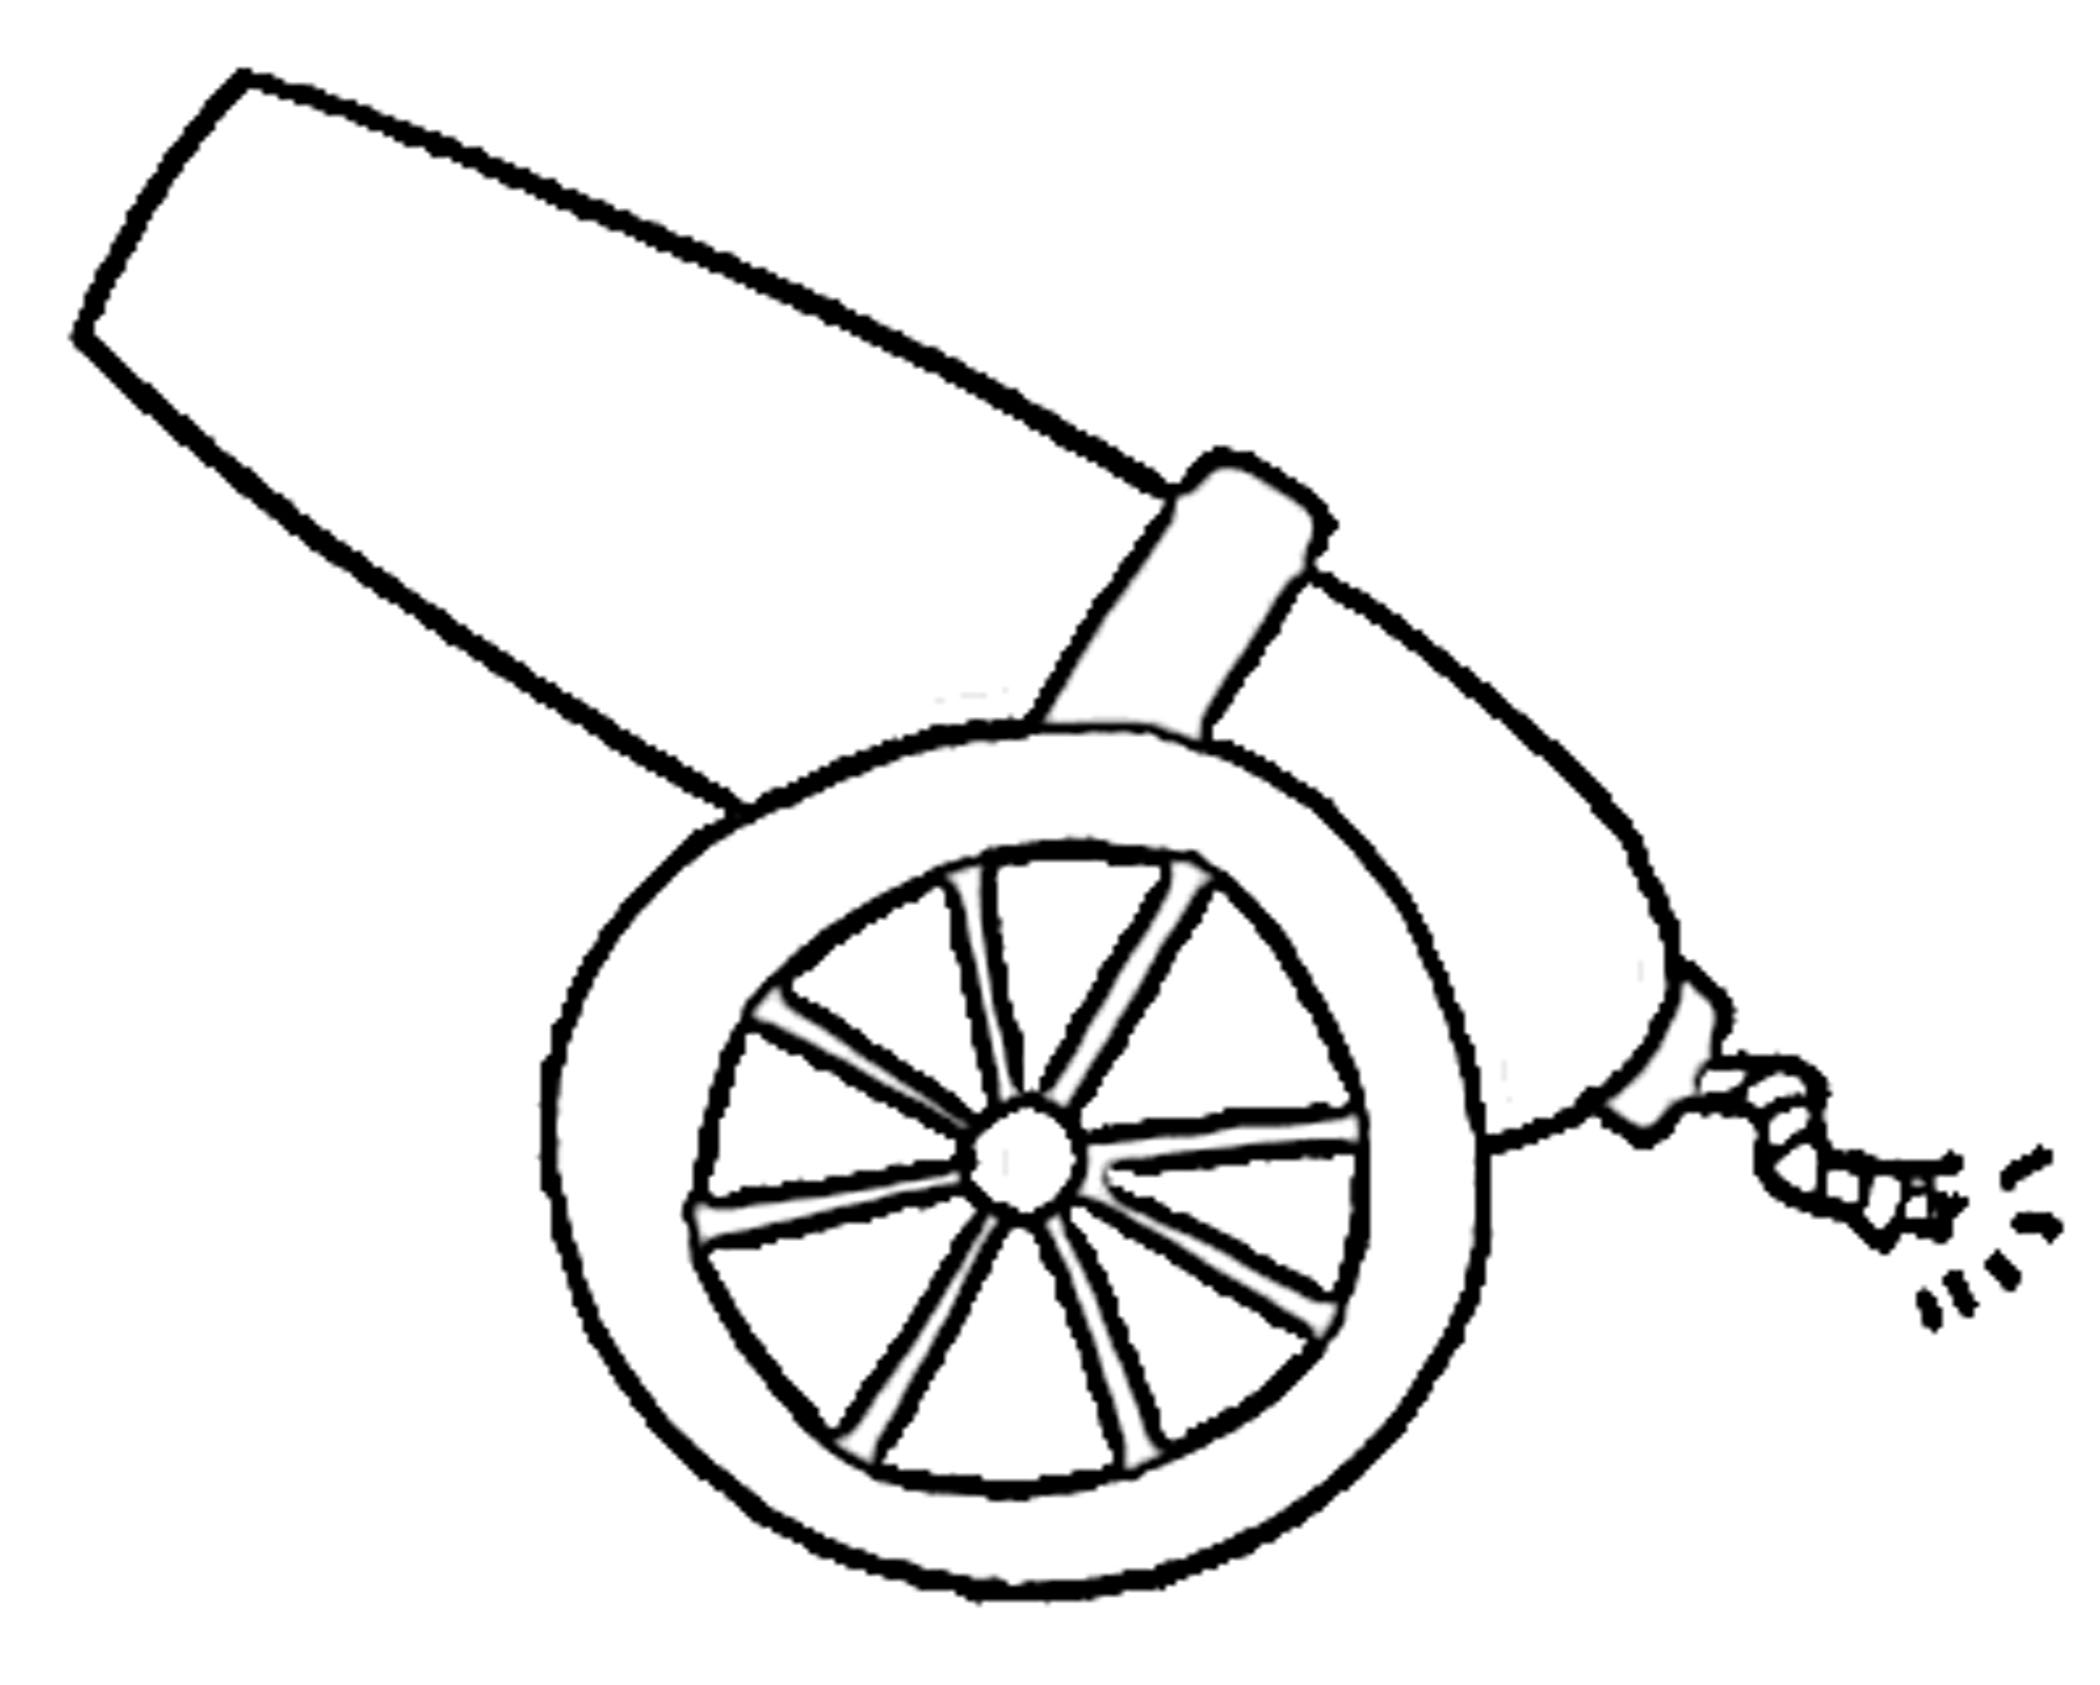 Cannon Drawing - ClipArt Best